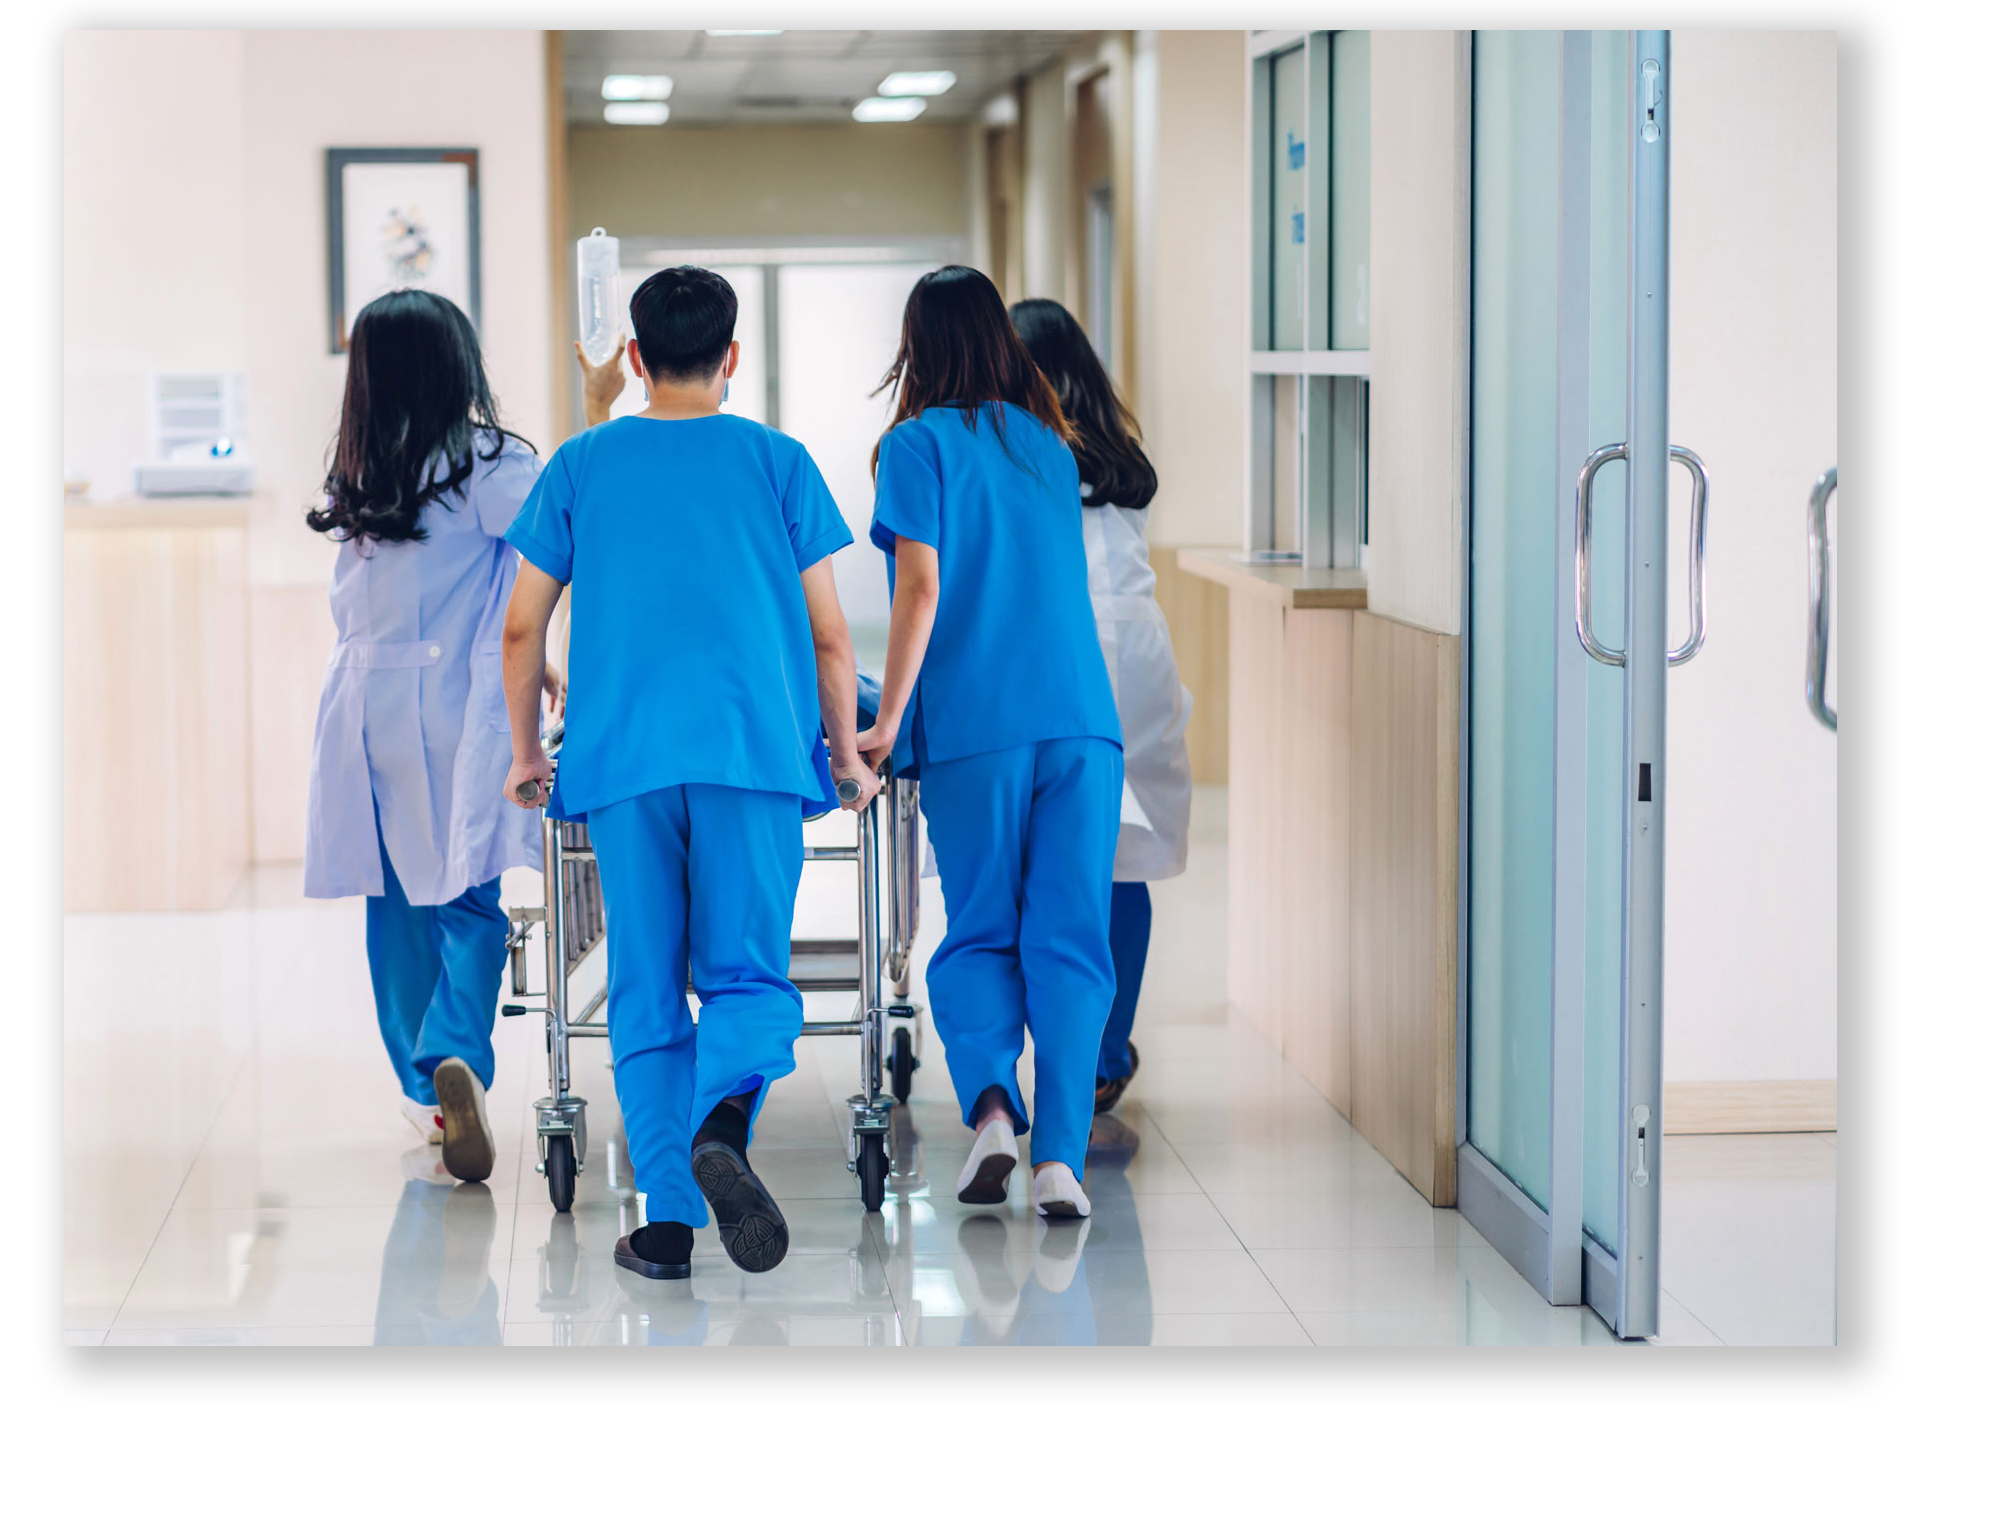 A group of doctors and nurses rushing a patient down a hospital ward corridor to surgery.